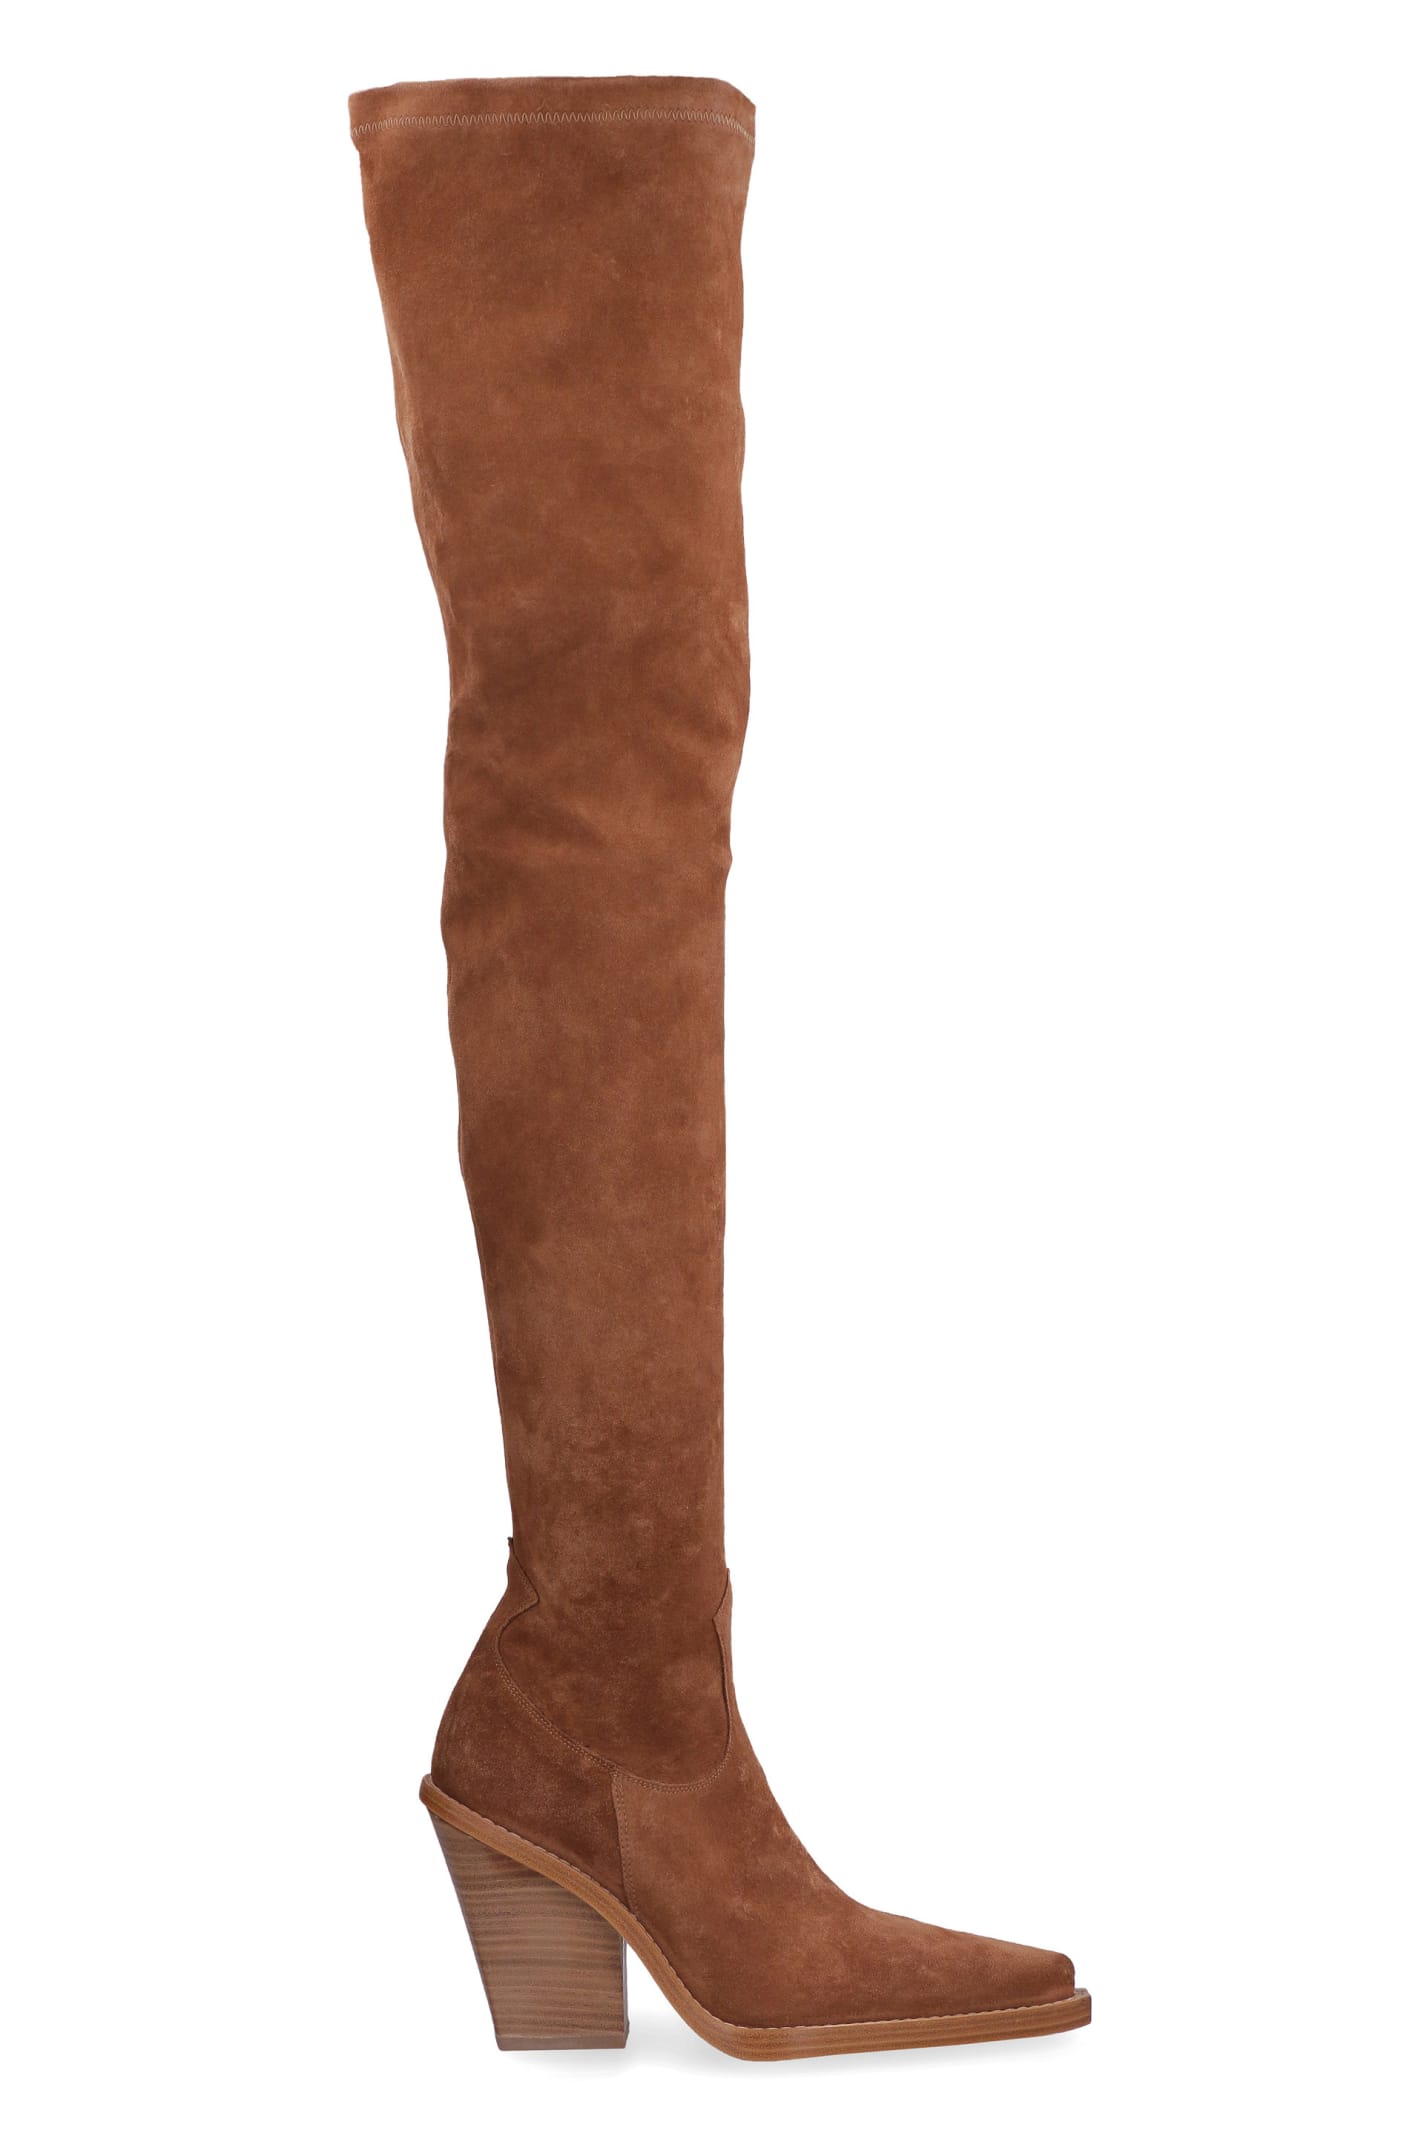 Paris Texas Stretch Suede Over The Knee Boots